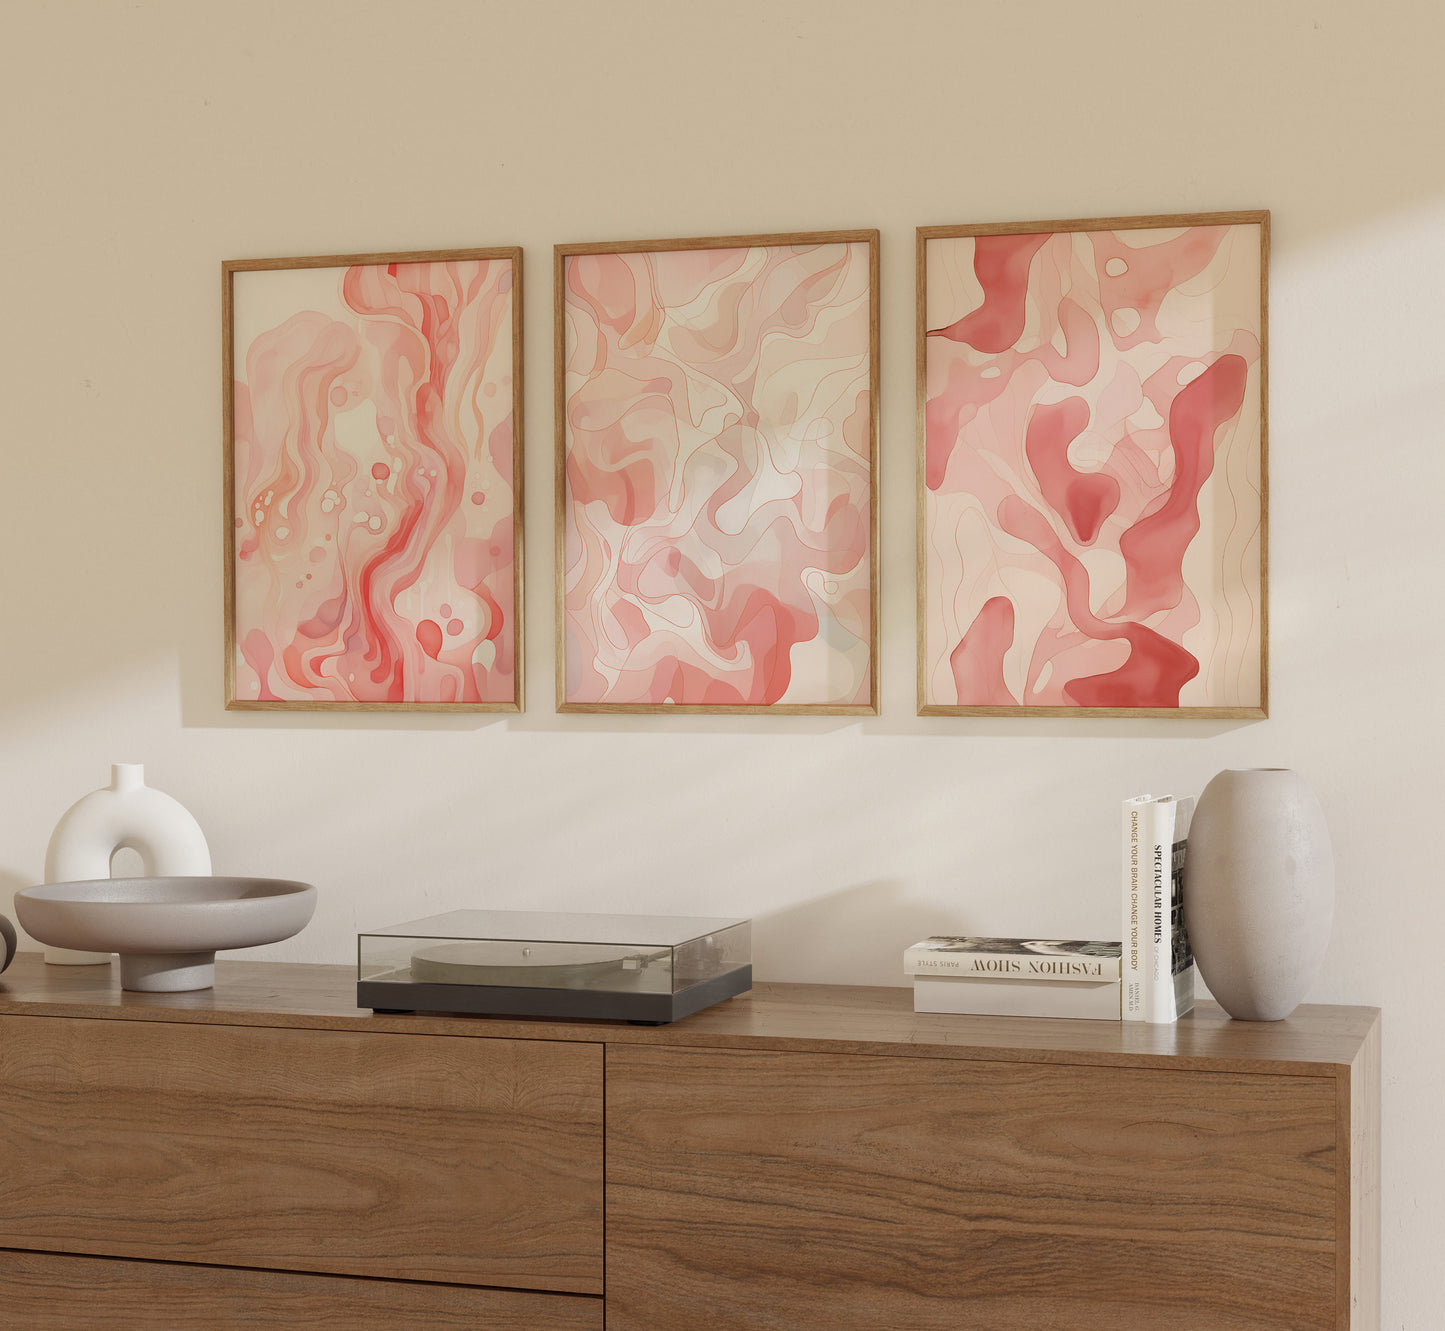 Three abstract paintings on a wall above a wooden sideboard with decorative items.